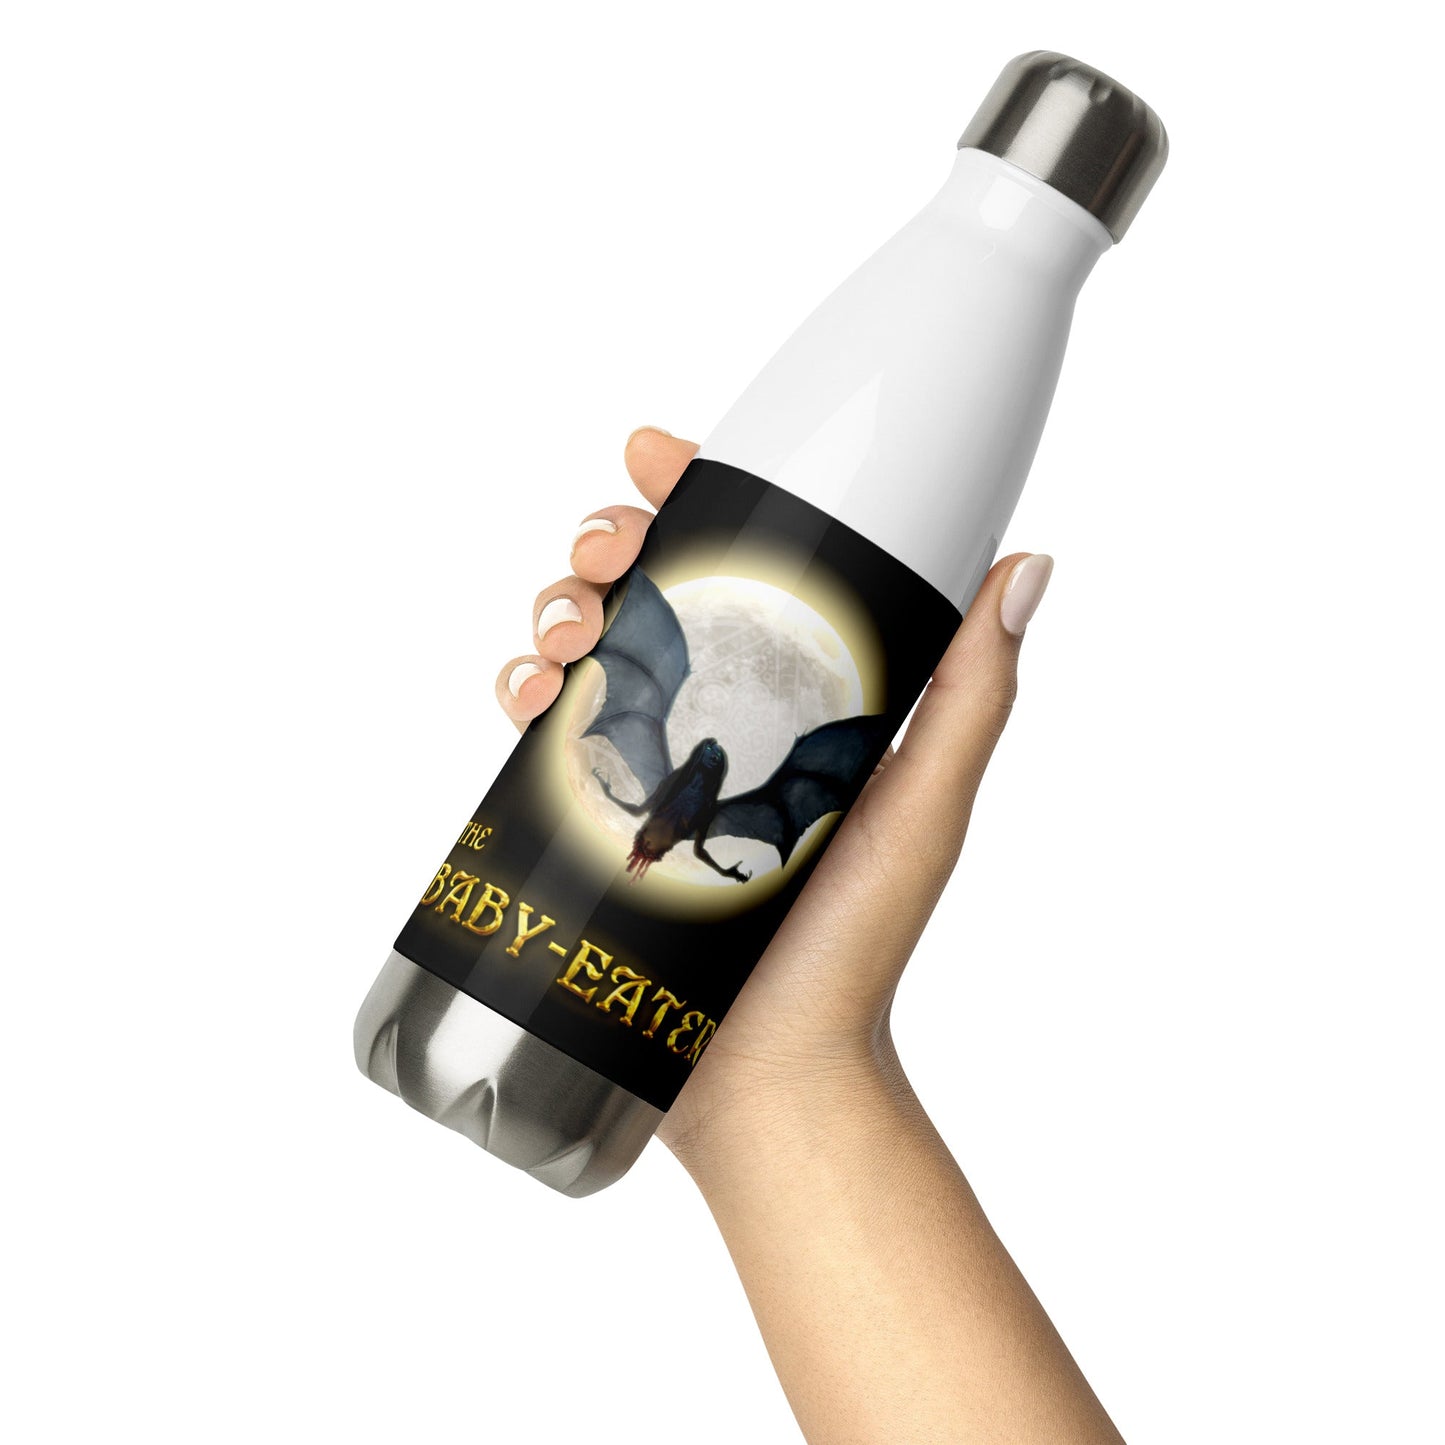 The Baby-Eater Stainless Steel Water Bottle - Spectral Ink Shop - Water Bottles -9075620_10798